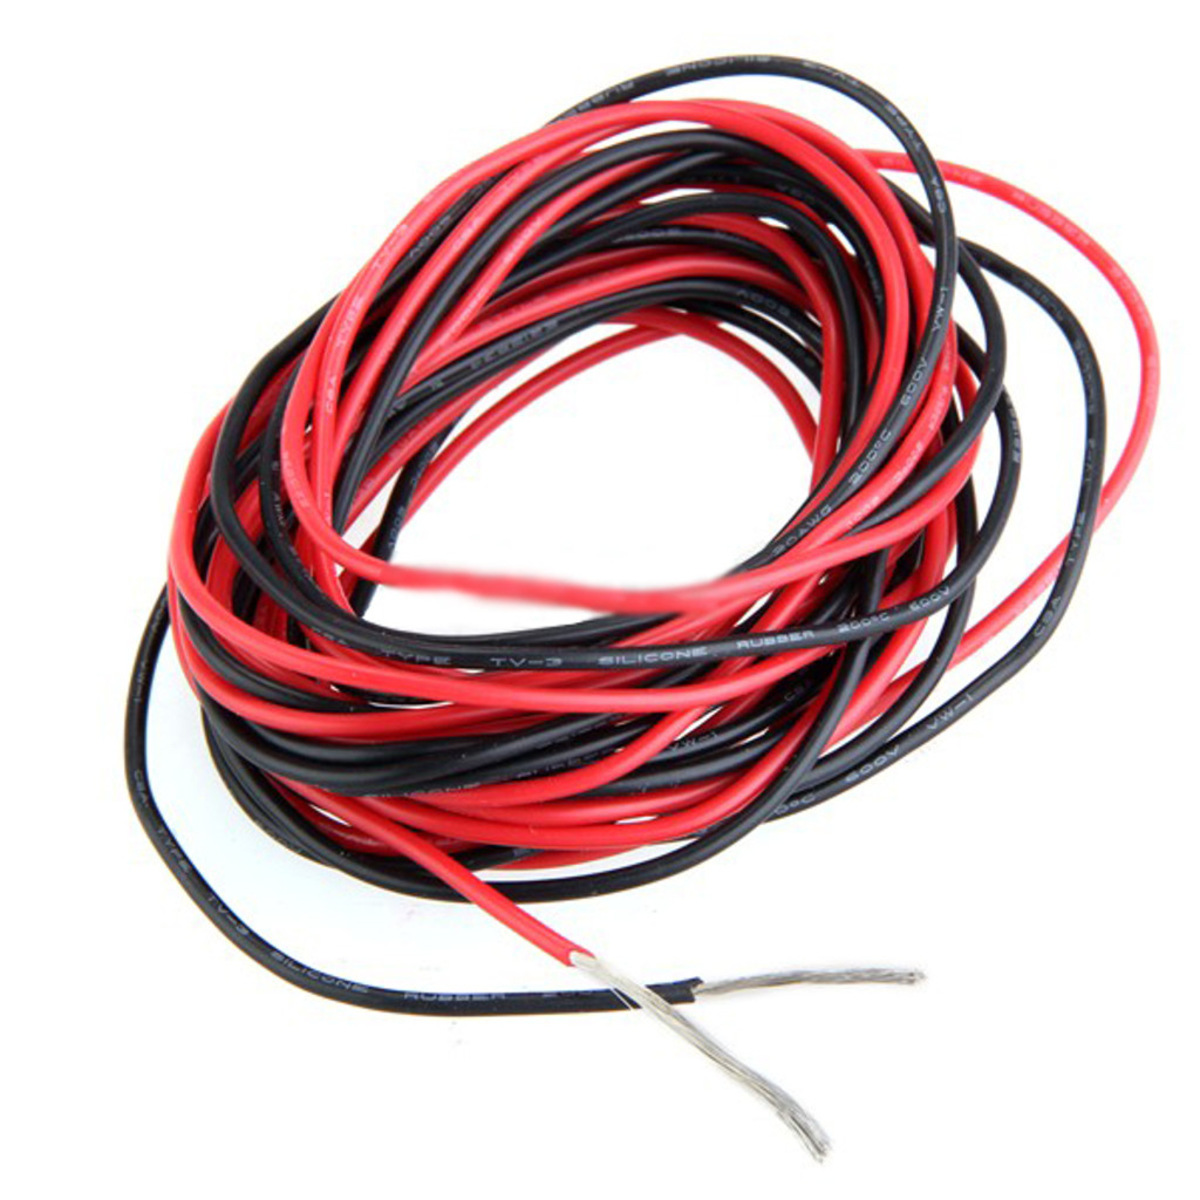 13 Best 20 Gauge Electrical Wire for 2023